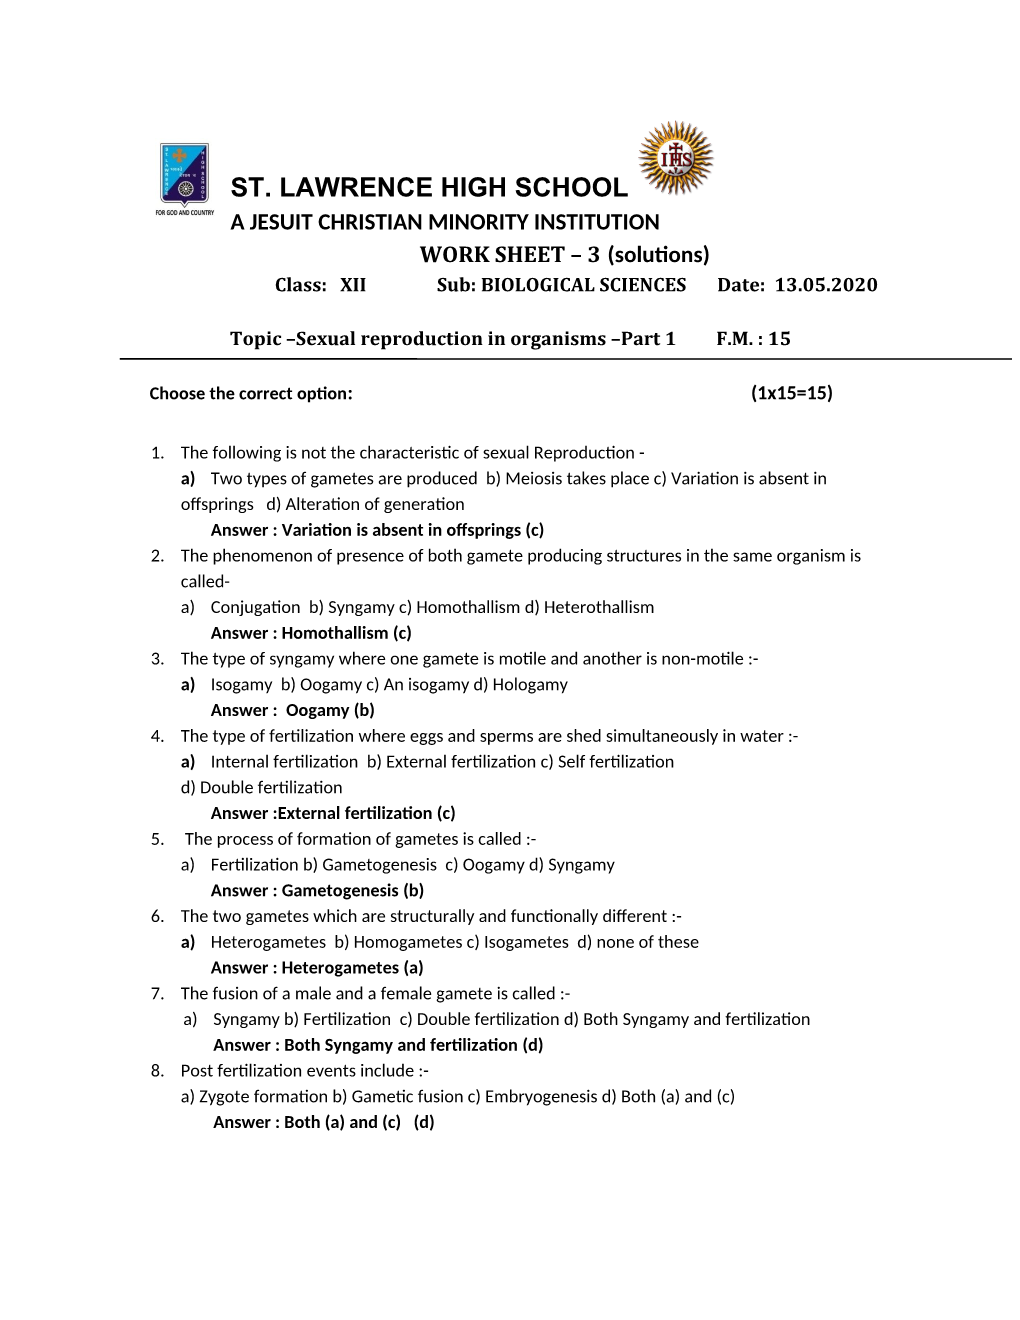 ST. LAWRENCE HIGH SCHOOL a JESUIT CHRISTIAN MINORITY INSTITUTION WORK SHEET – 3 (Solutions) Class: XII Sub: BIOLOGICAL SCIENCES Date: 13.05.2020